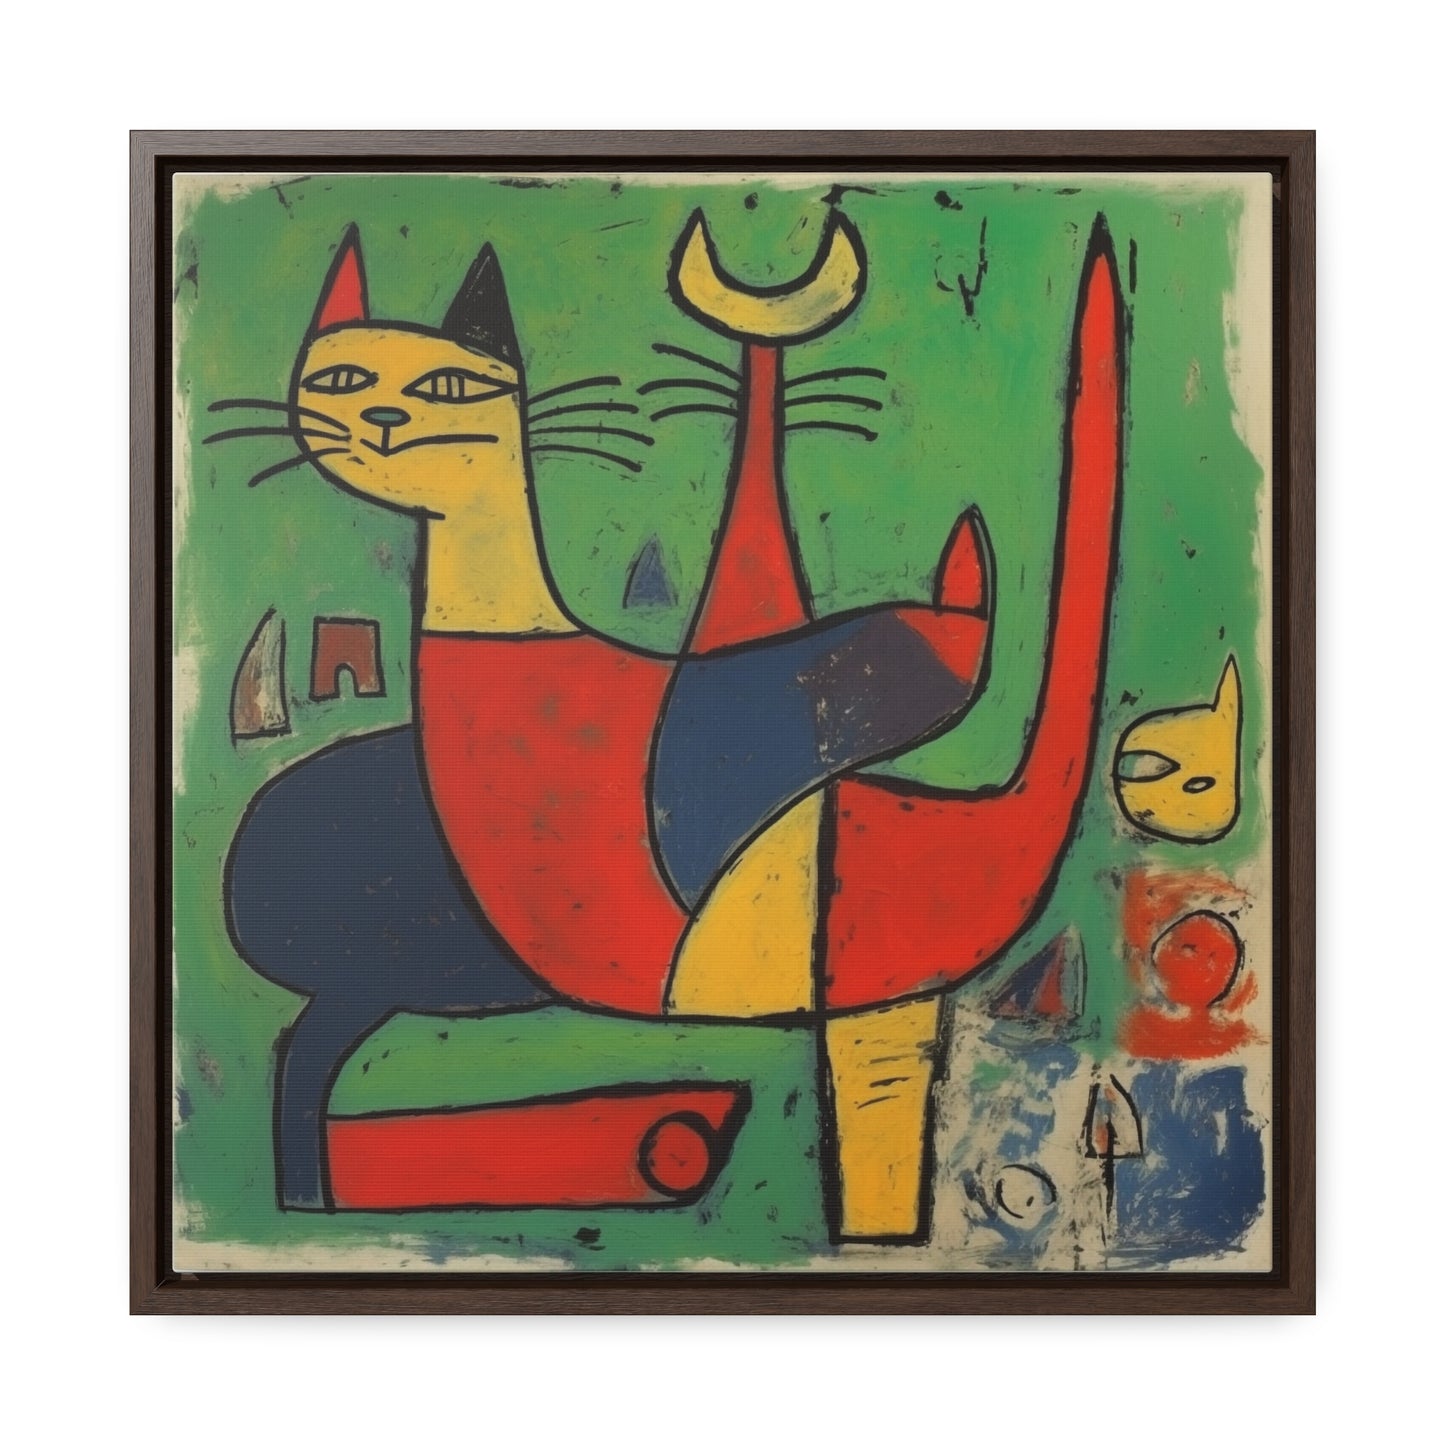 Cat 136, Gallery Canvas Wraps, Square Frame